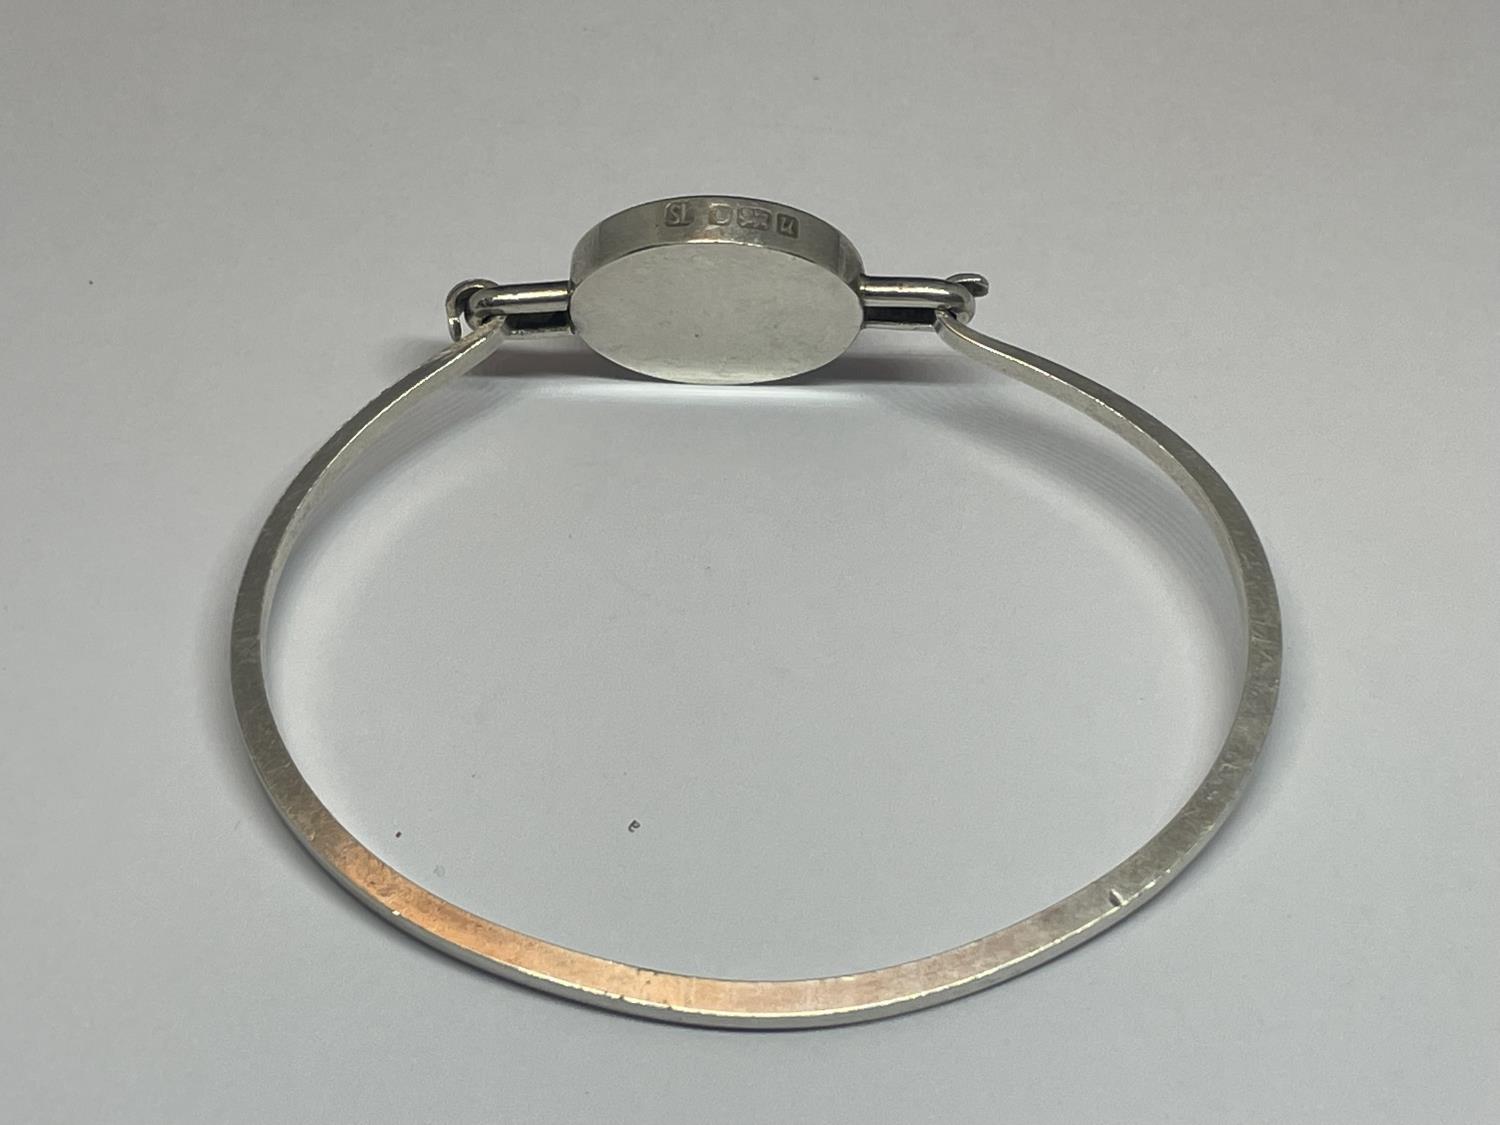 A HALLMARKED SHEFFIELD SILVER BANGLE WITH A BLUE JOHN STONE - Image 3 of 4